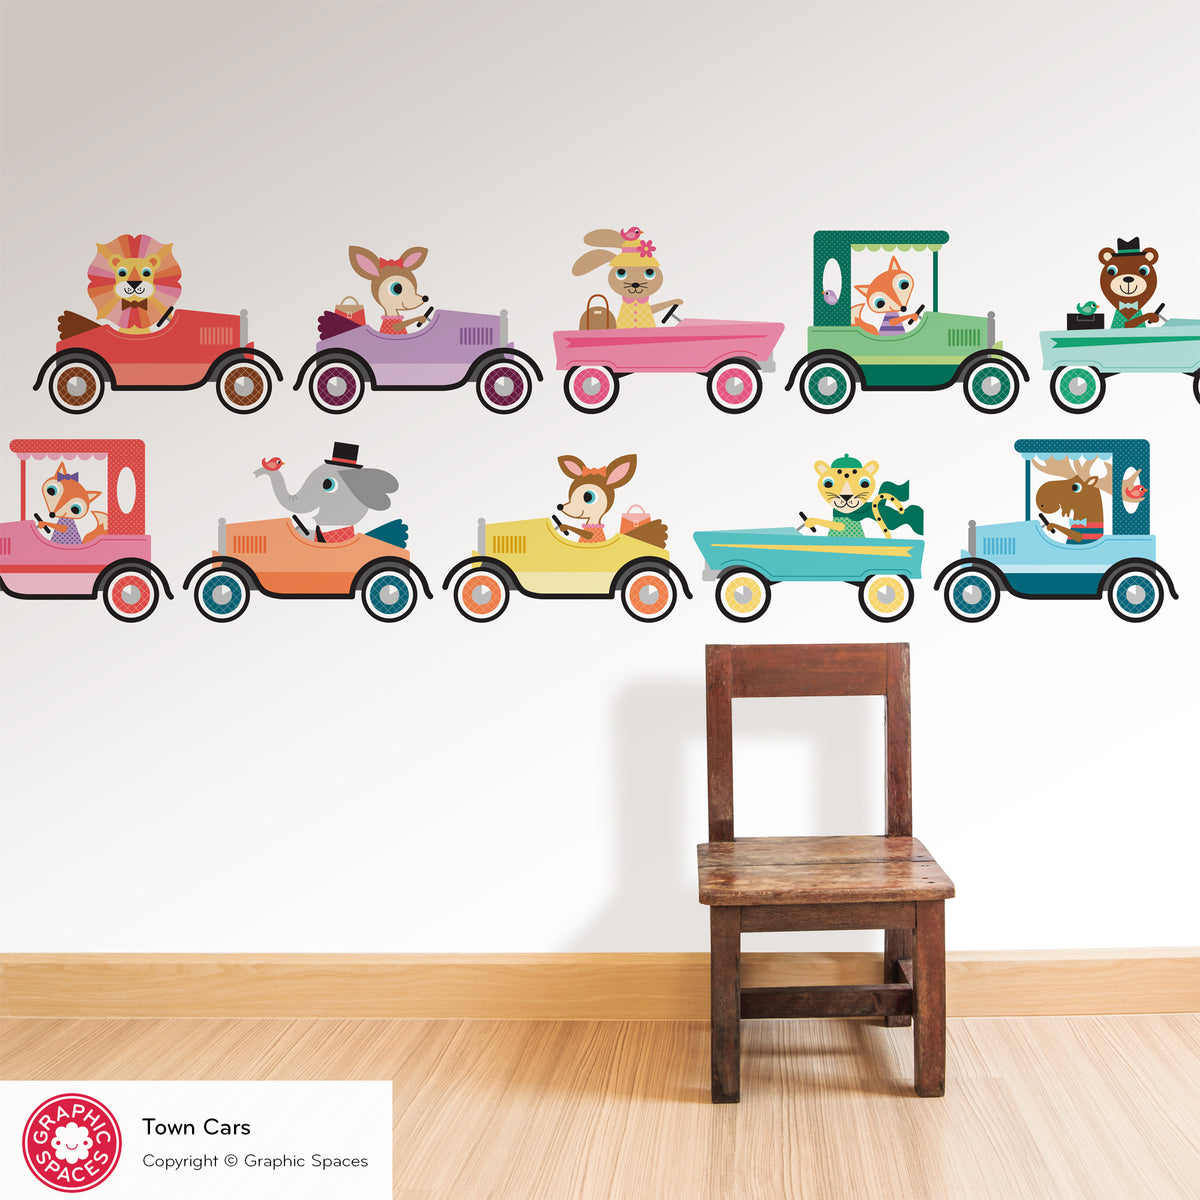 Animals in Cars Fabric Wall Decals - Pack of 10